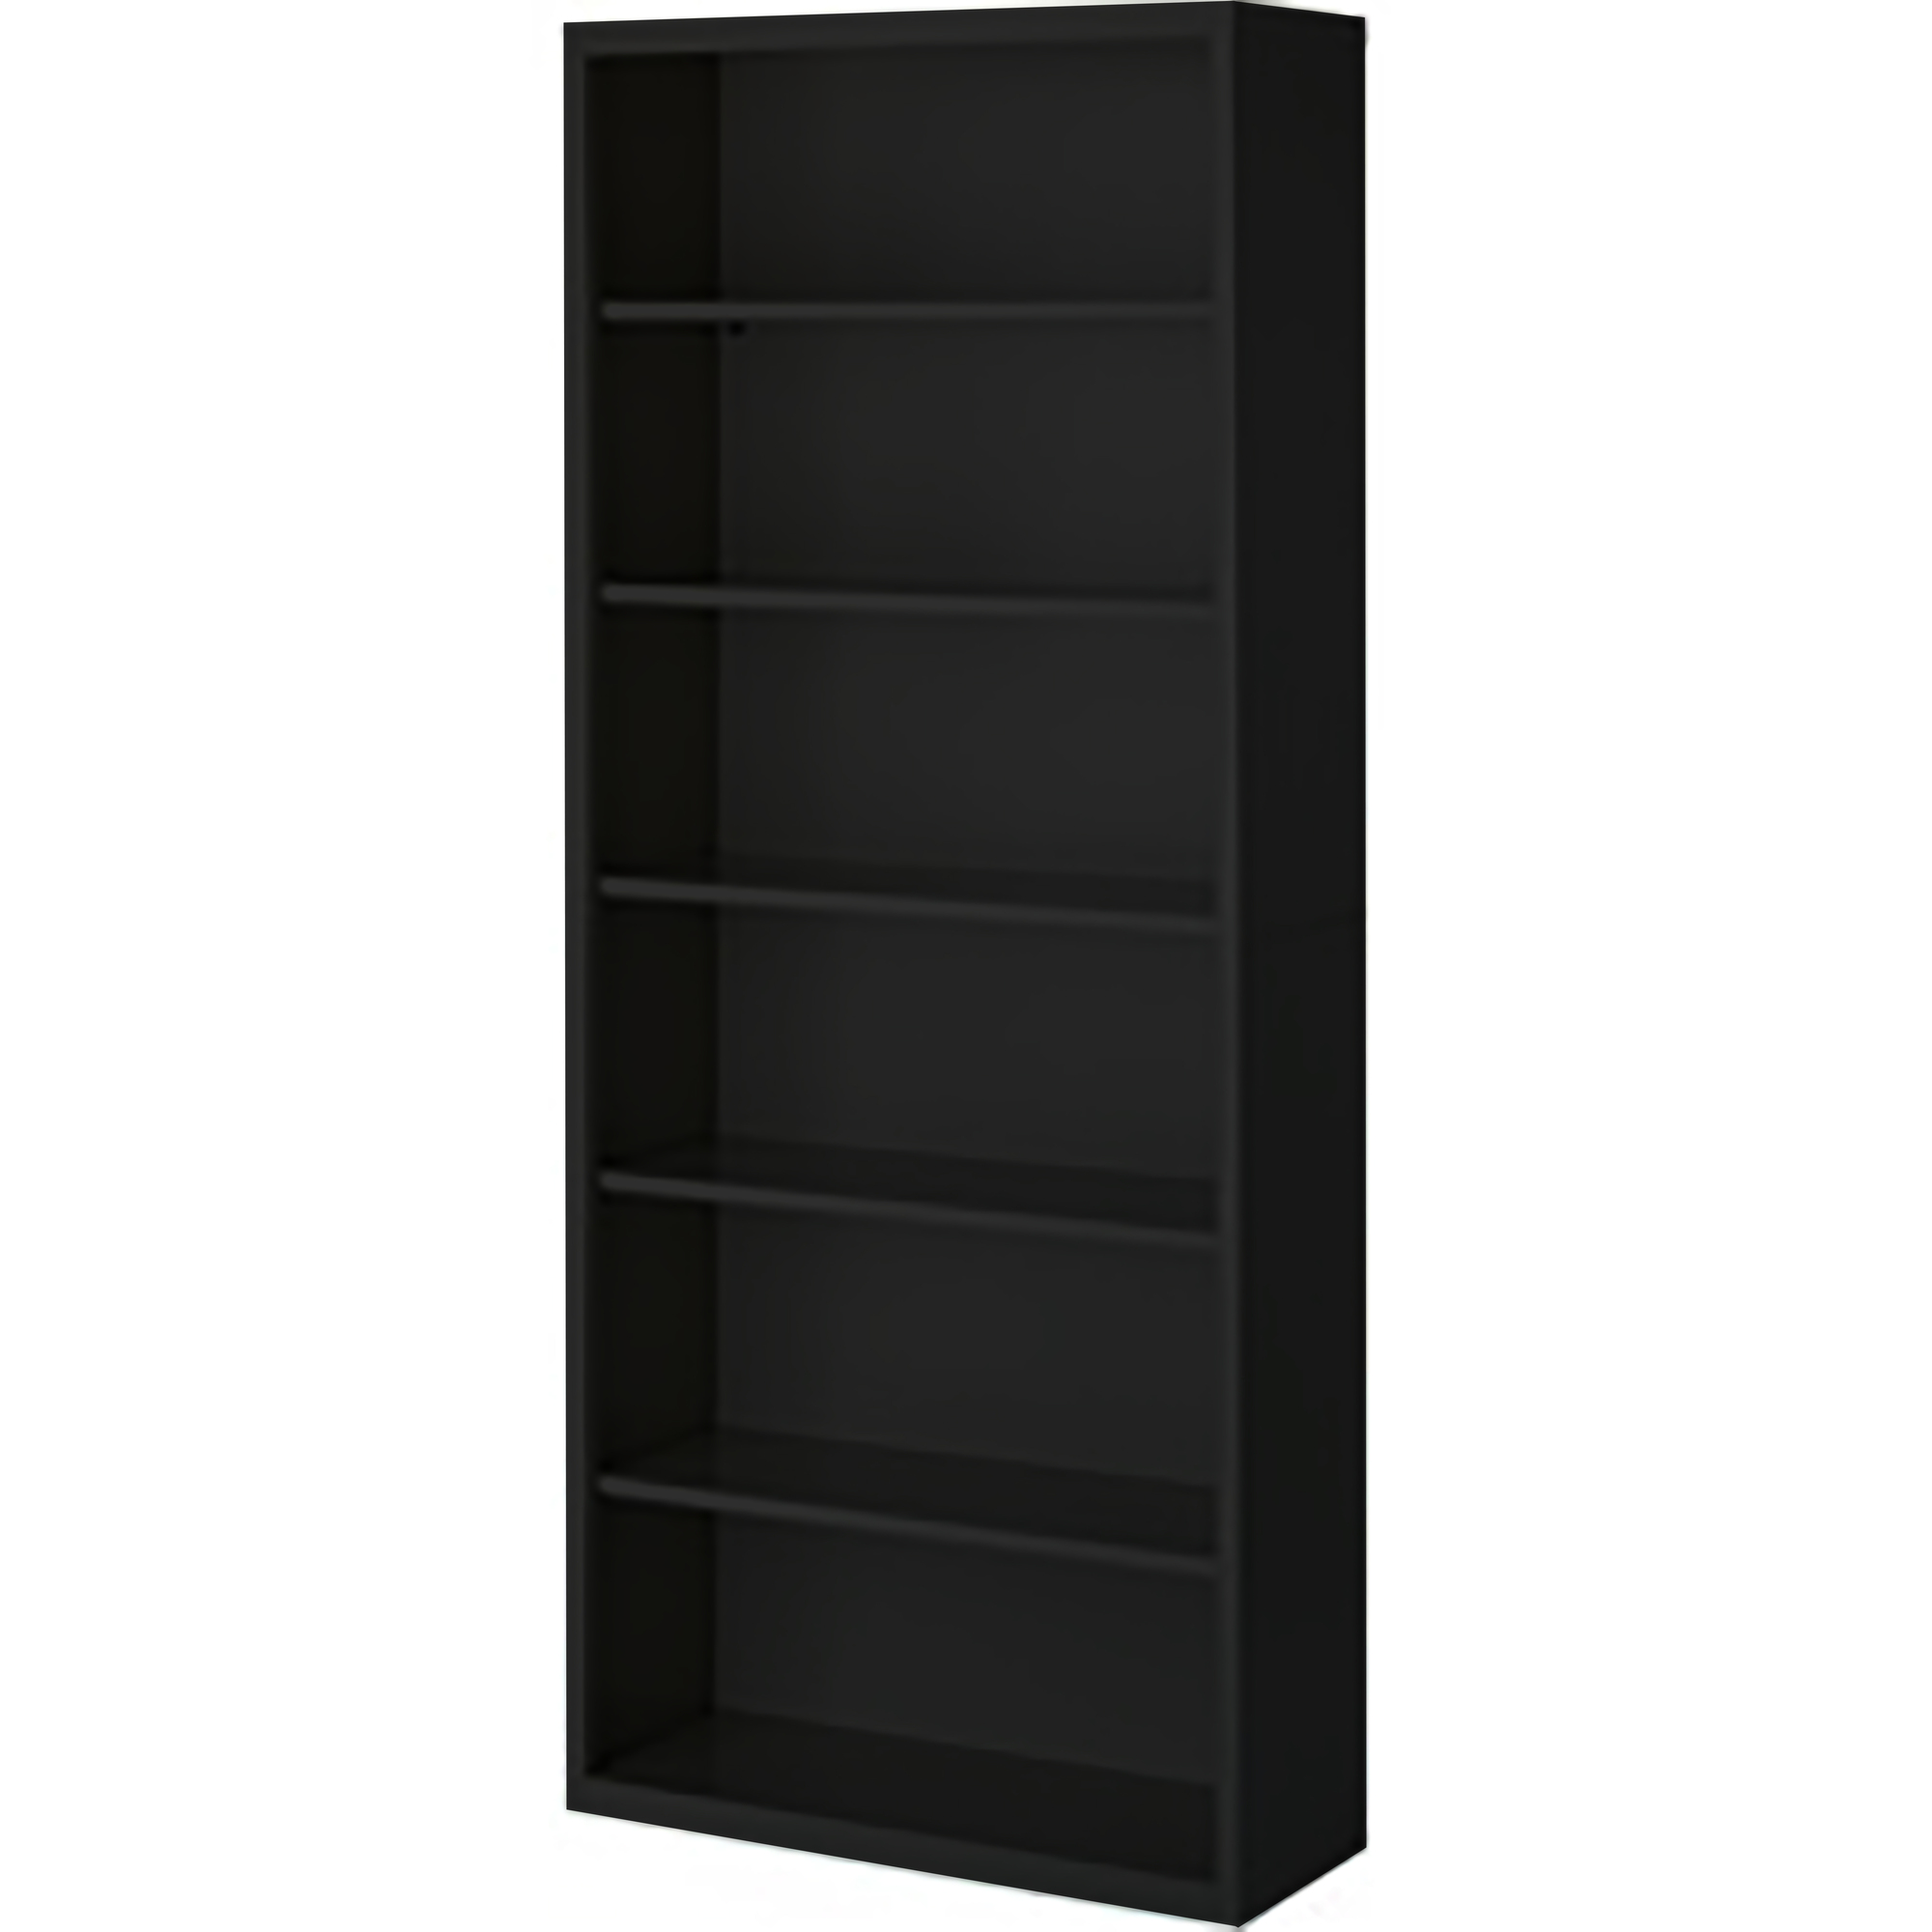 36Inchx18Inchx84Inch Black Bookcase Steel Fully Assembled, Height 84 in, Shelves (qty.) 6, Material Steel, Model - Steel Cabinets USA BCA-368418-B